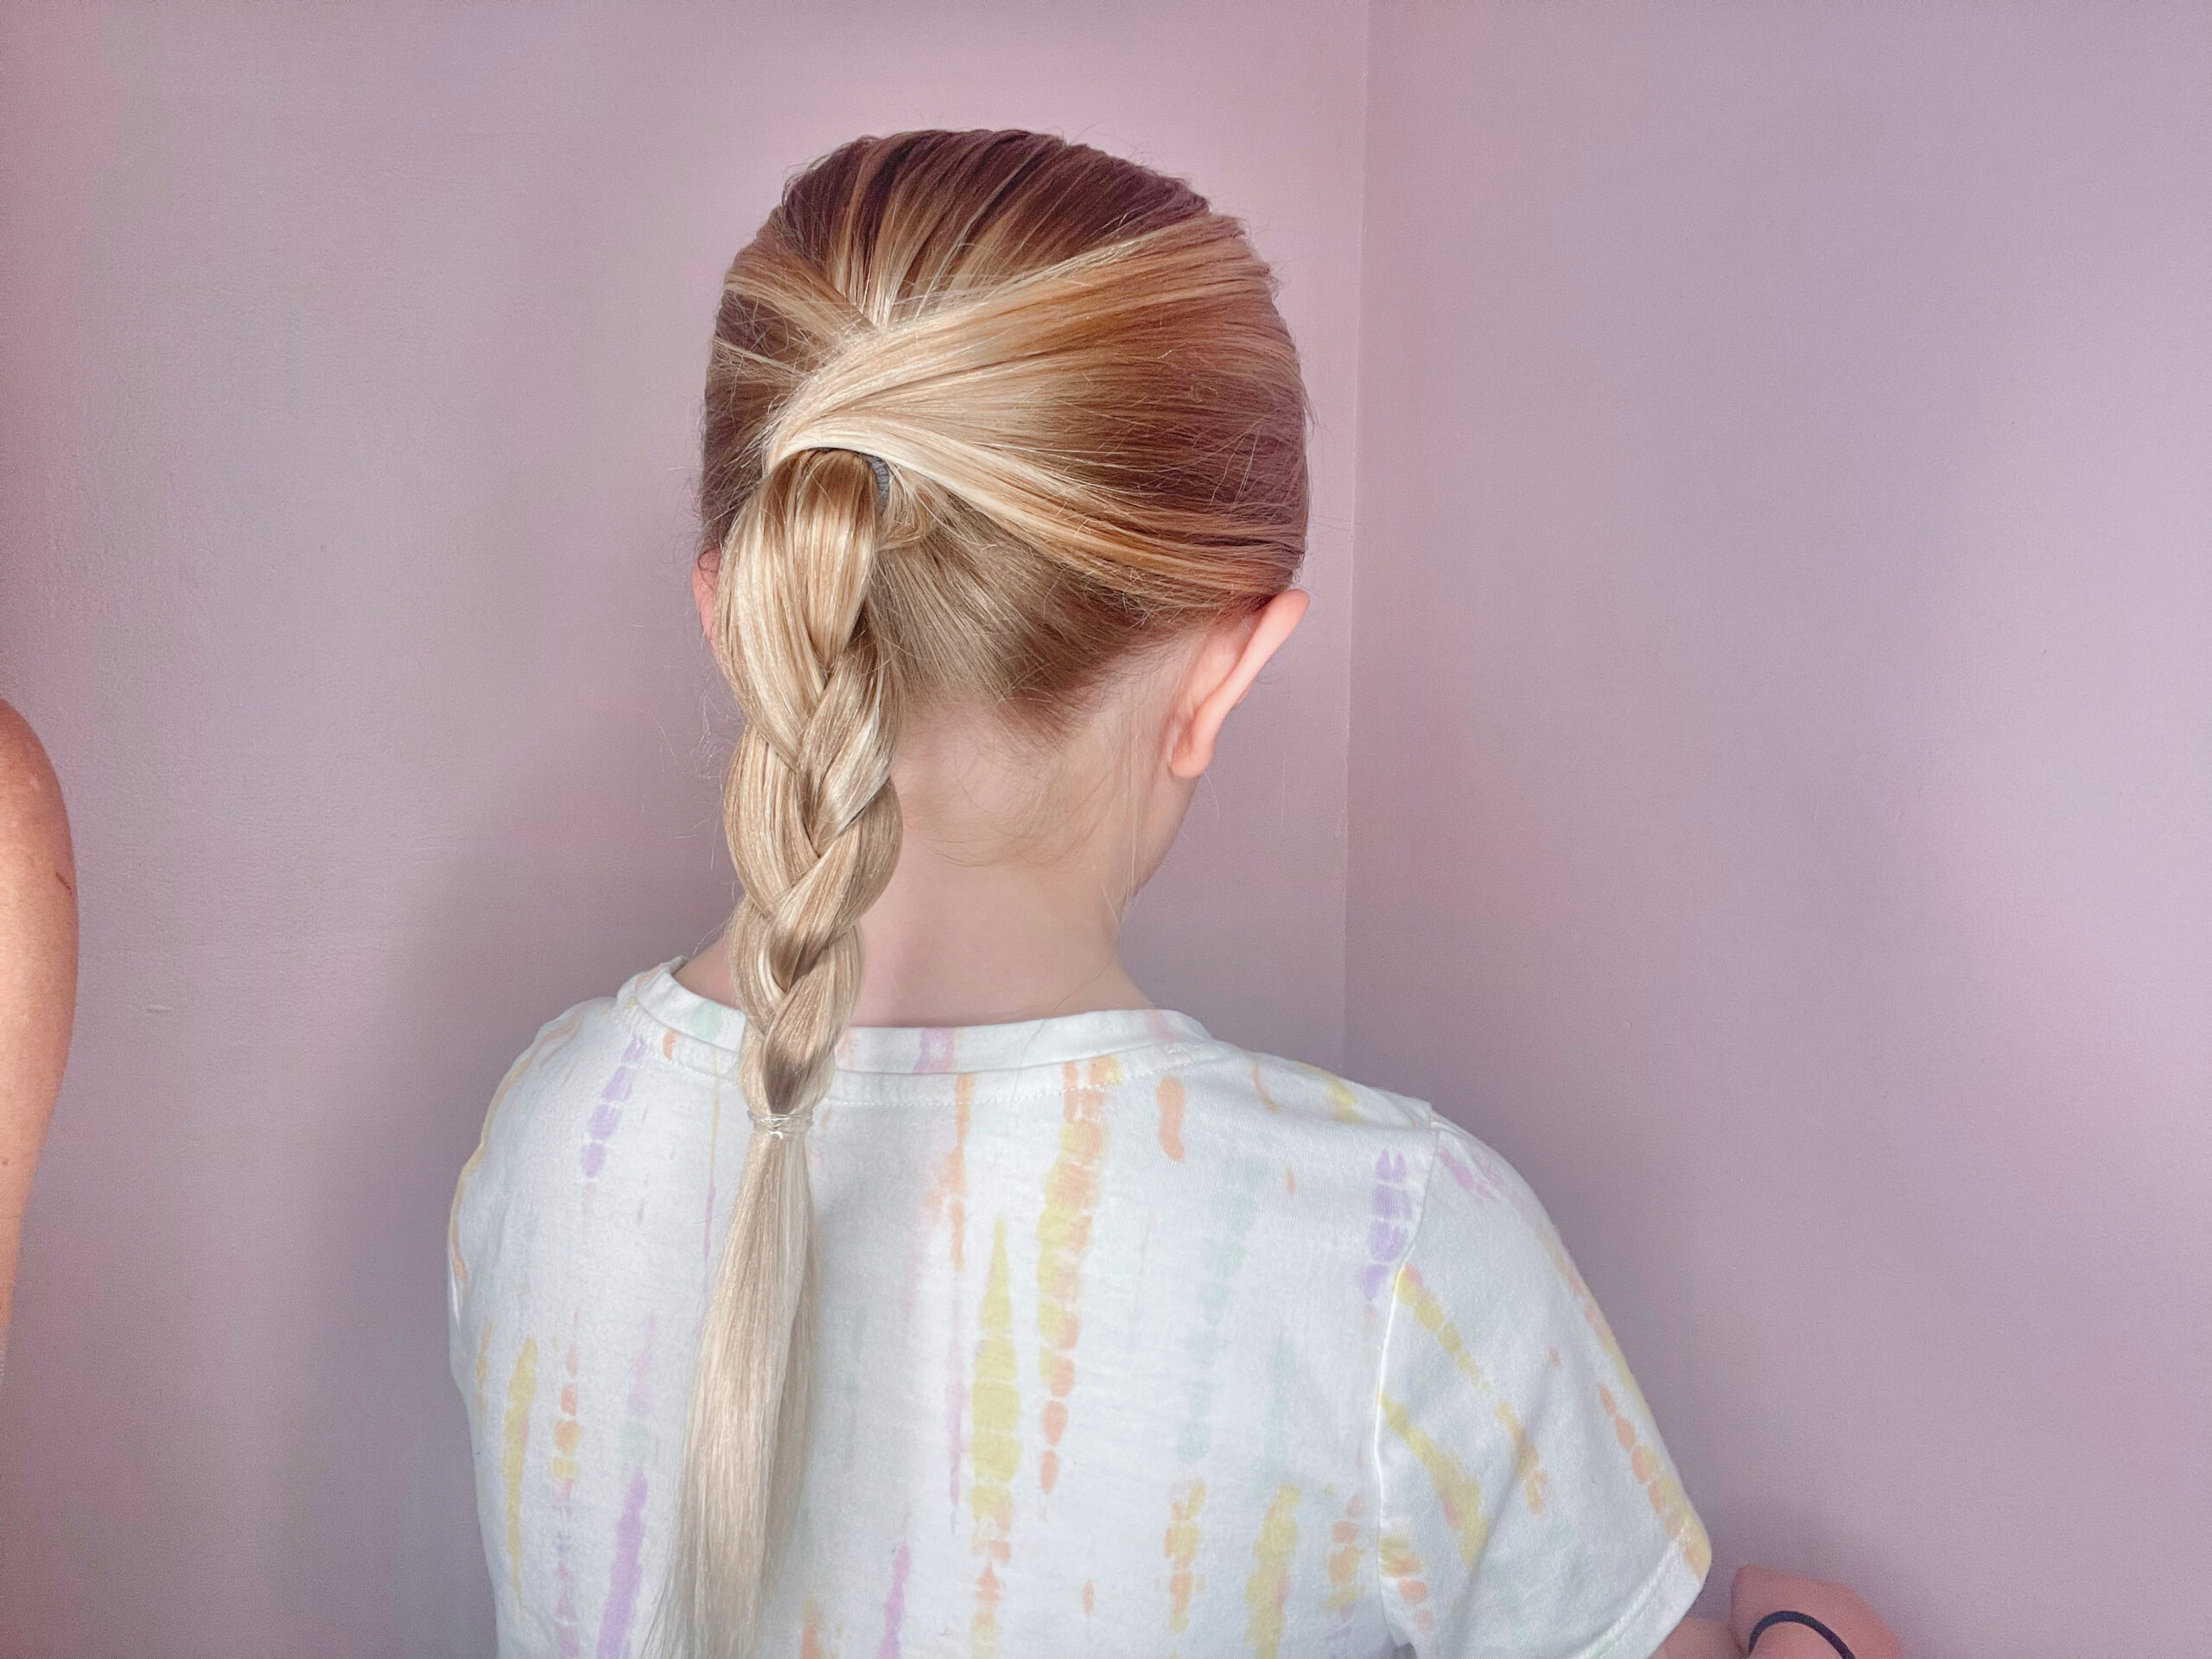 Ponytail Tutorial: One Ponytail (2) Different Ways - Stylish Life for Moms